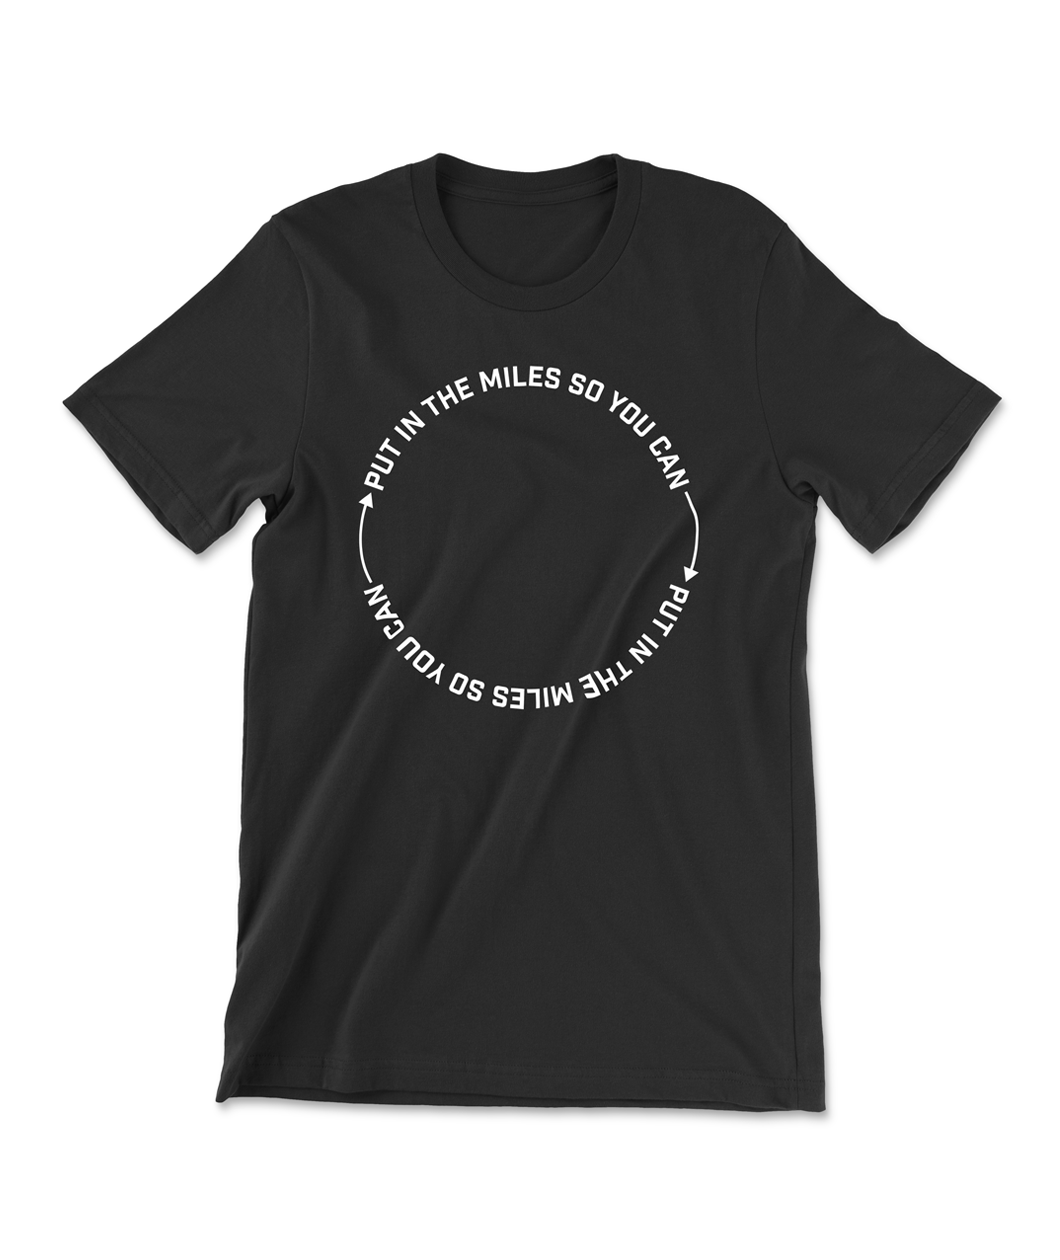 A black t-shirt that has text in a circle that reads 